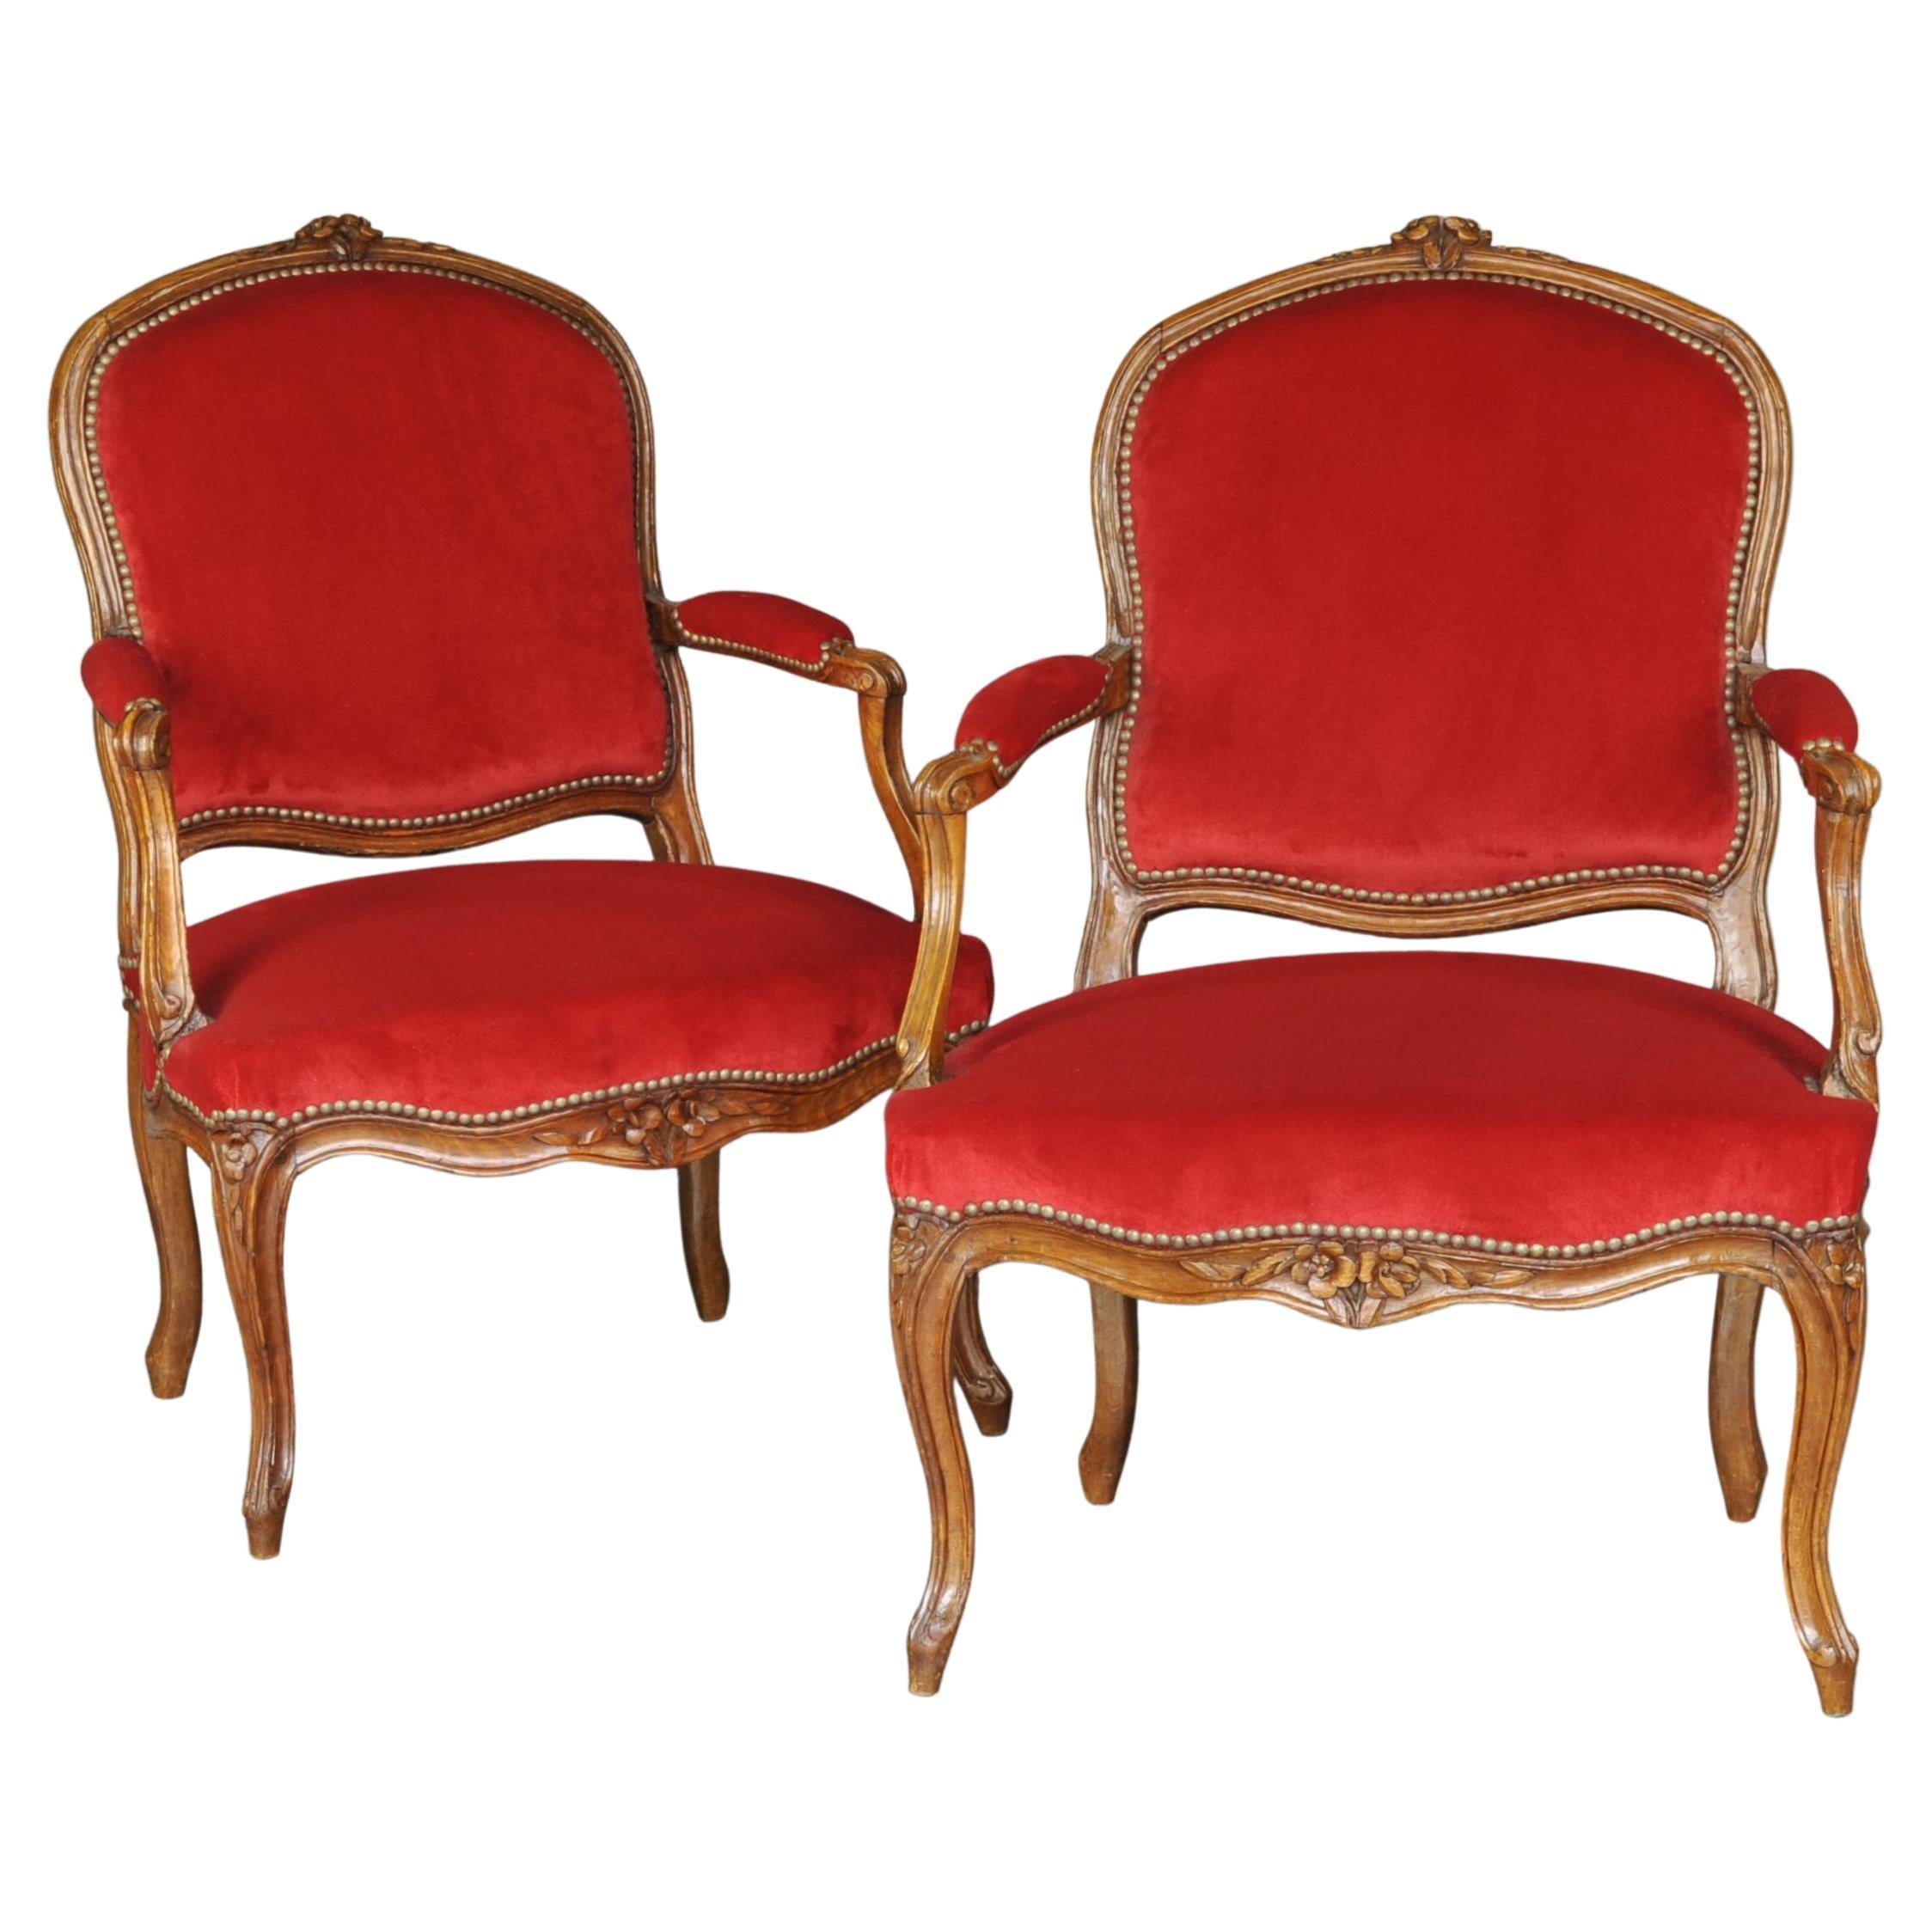 Pair of Large Louis XV Armchairs, 18th Century